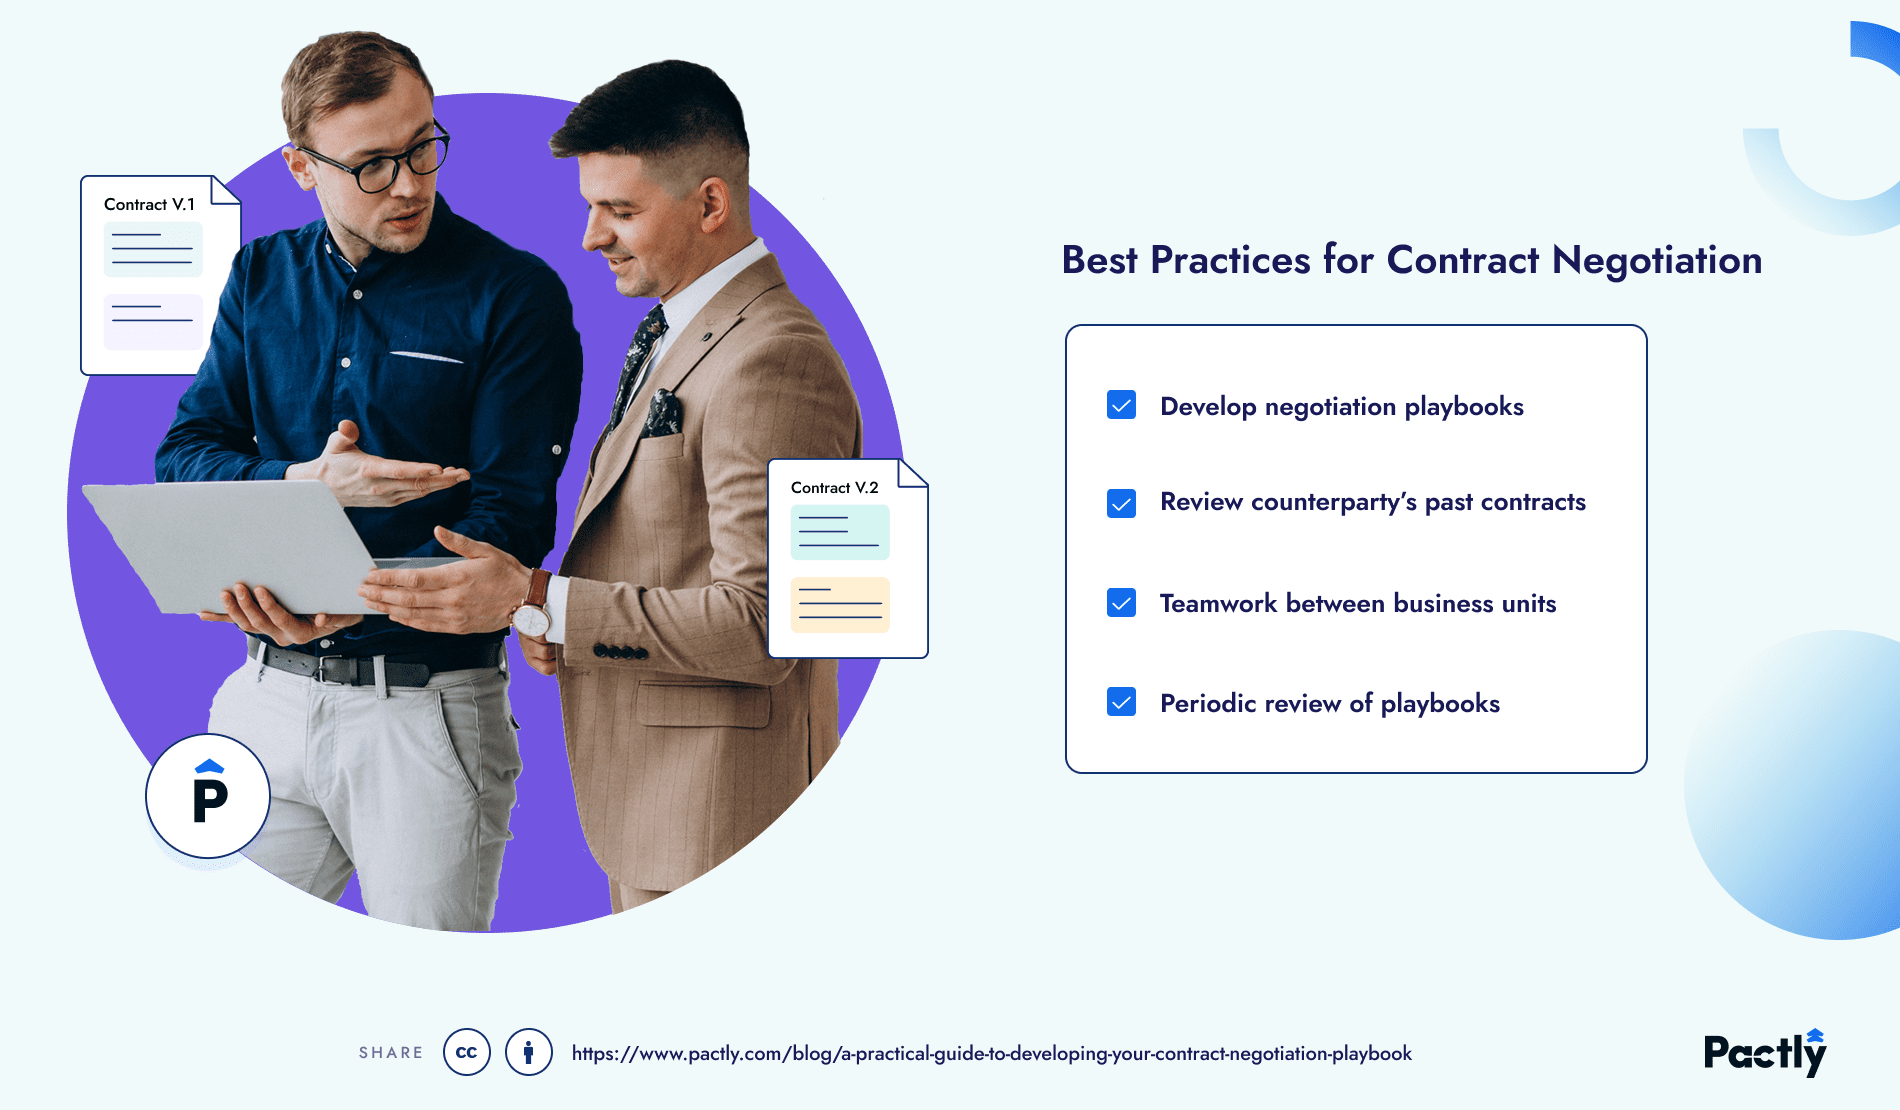 Best practices for contract negotiation